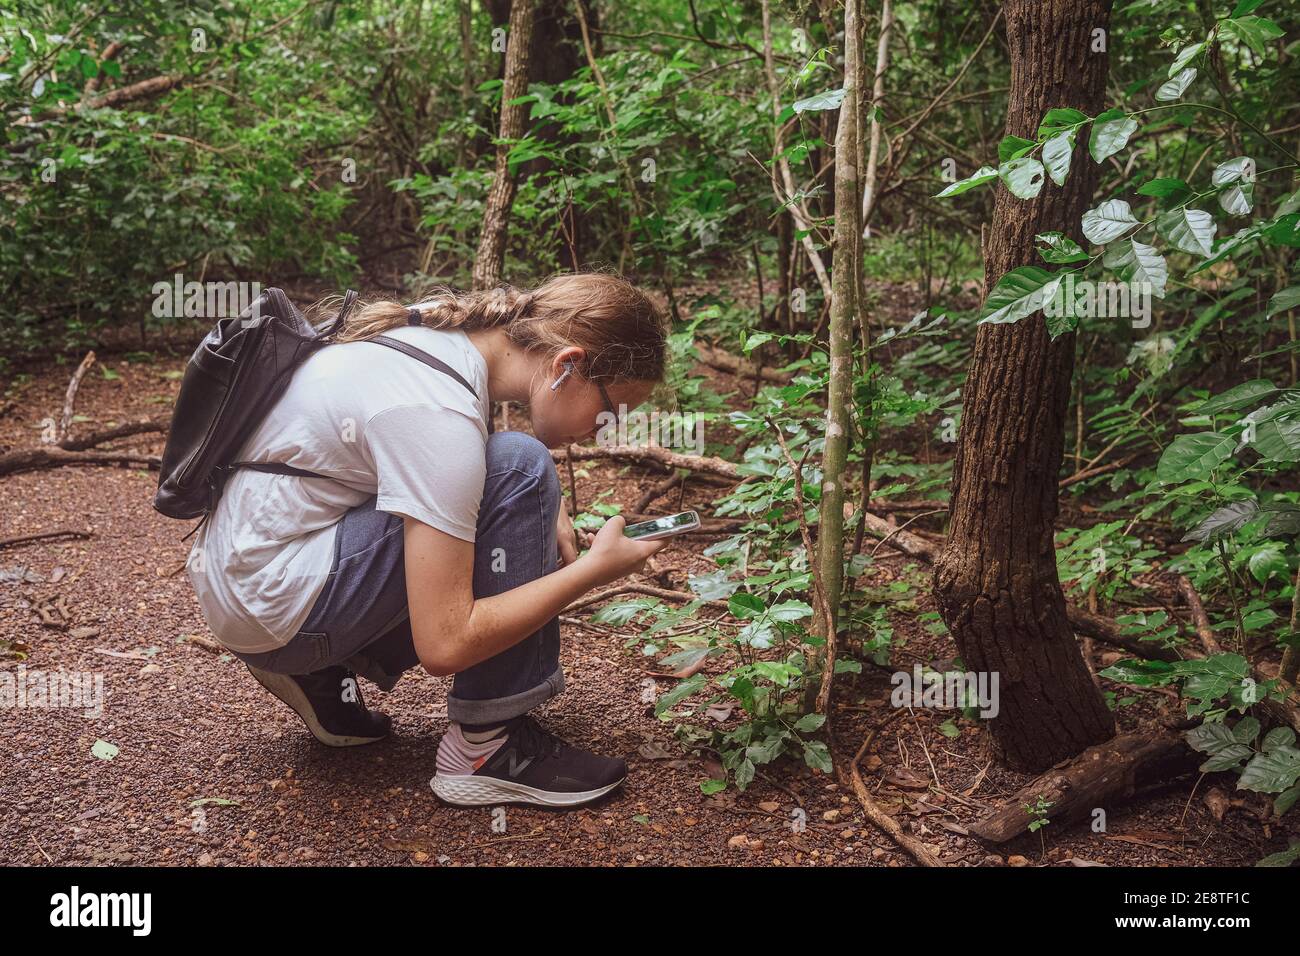 Teenage girl taking photographs with her mobile phone in forest. Stock Photo